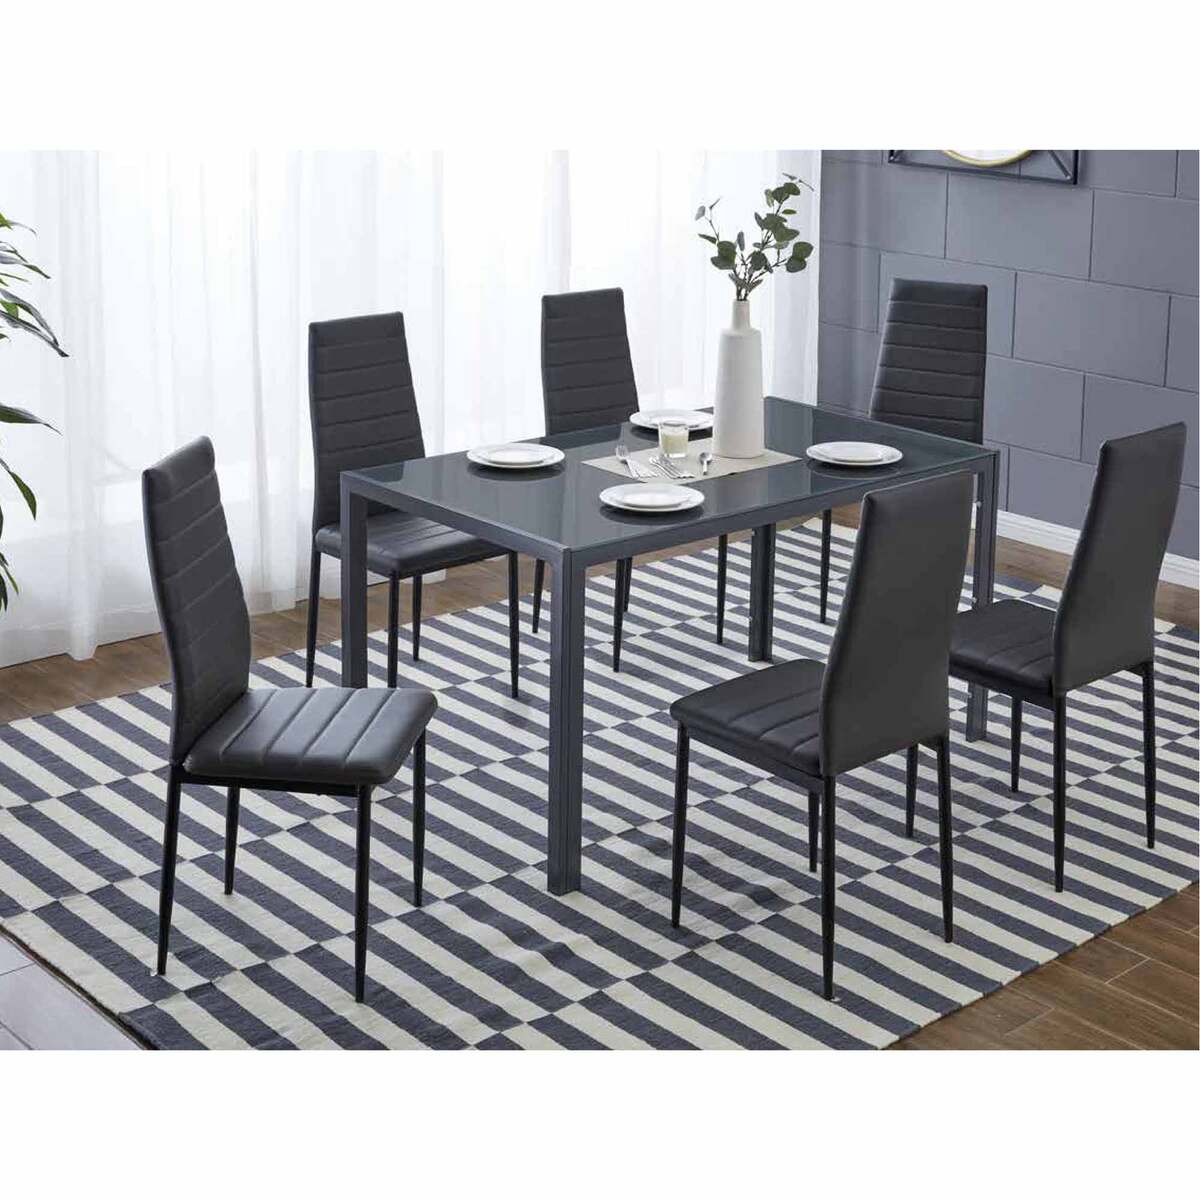 Maple Leaf Dining Table + 6 Chair MLM-184012